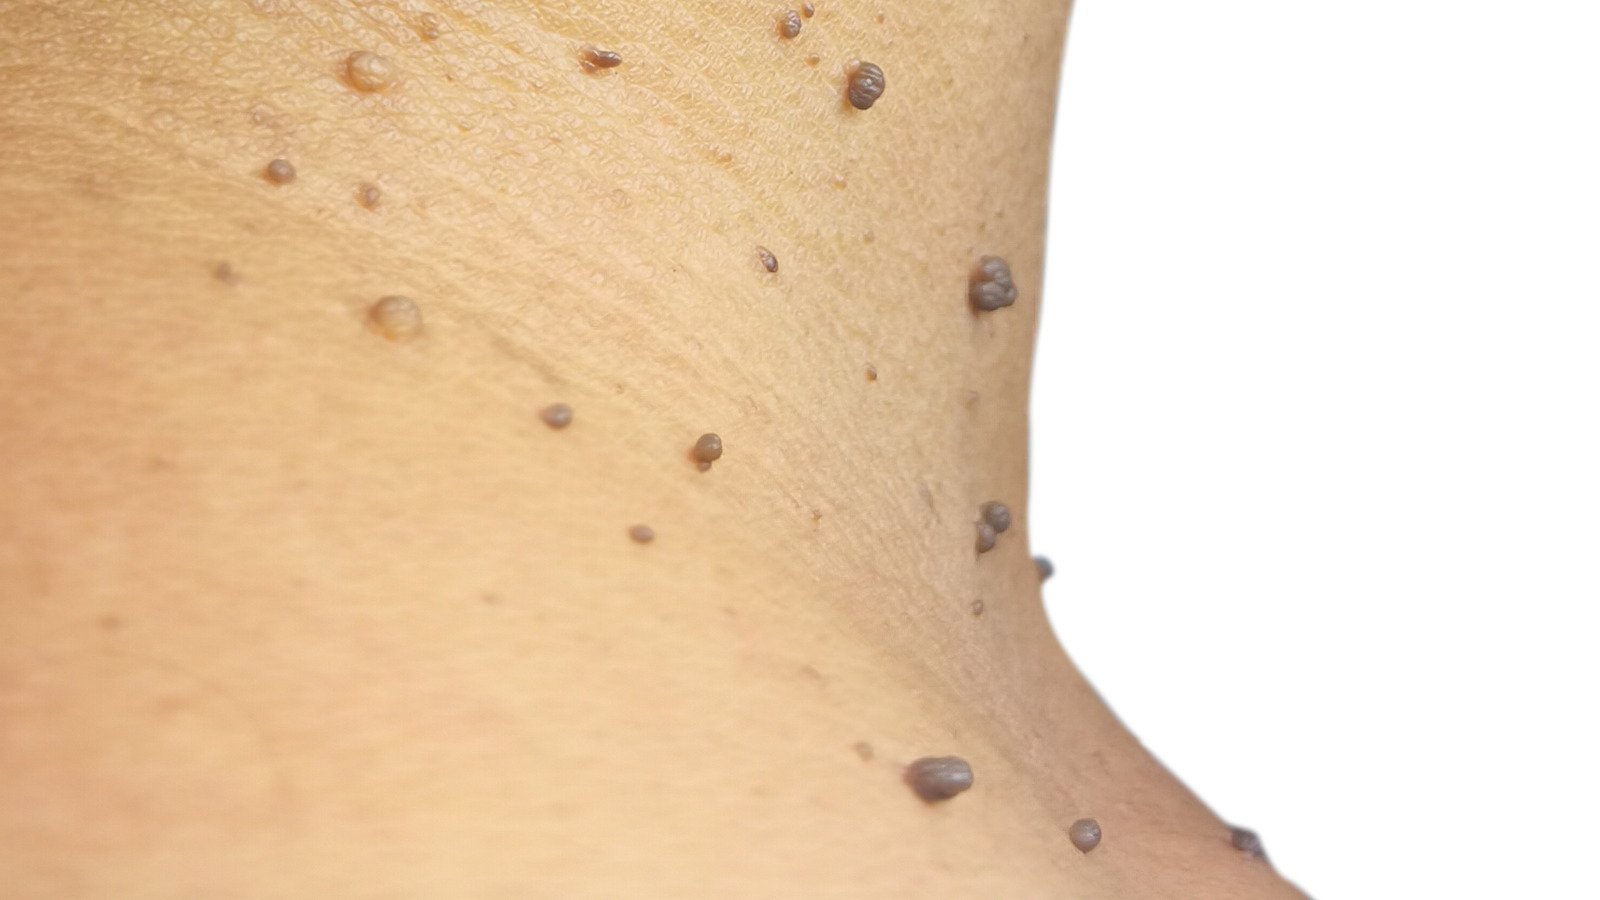 What Really Causes Skin Tags?